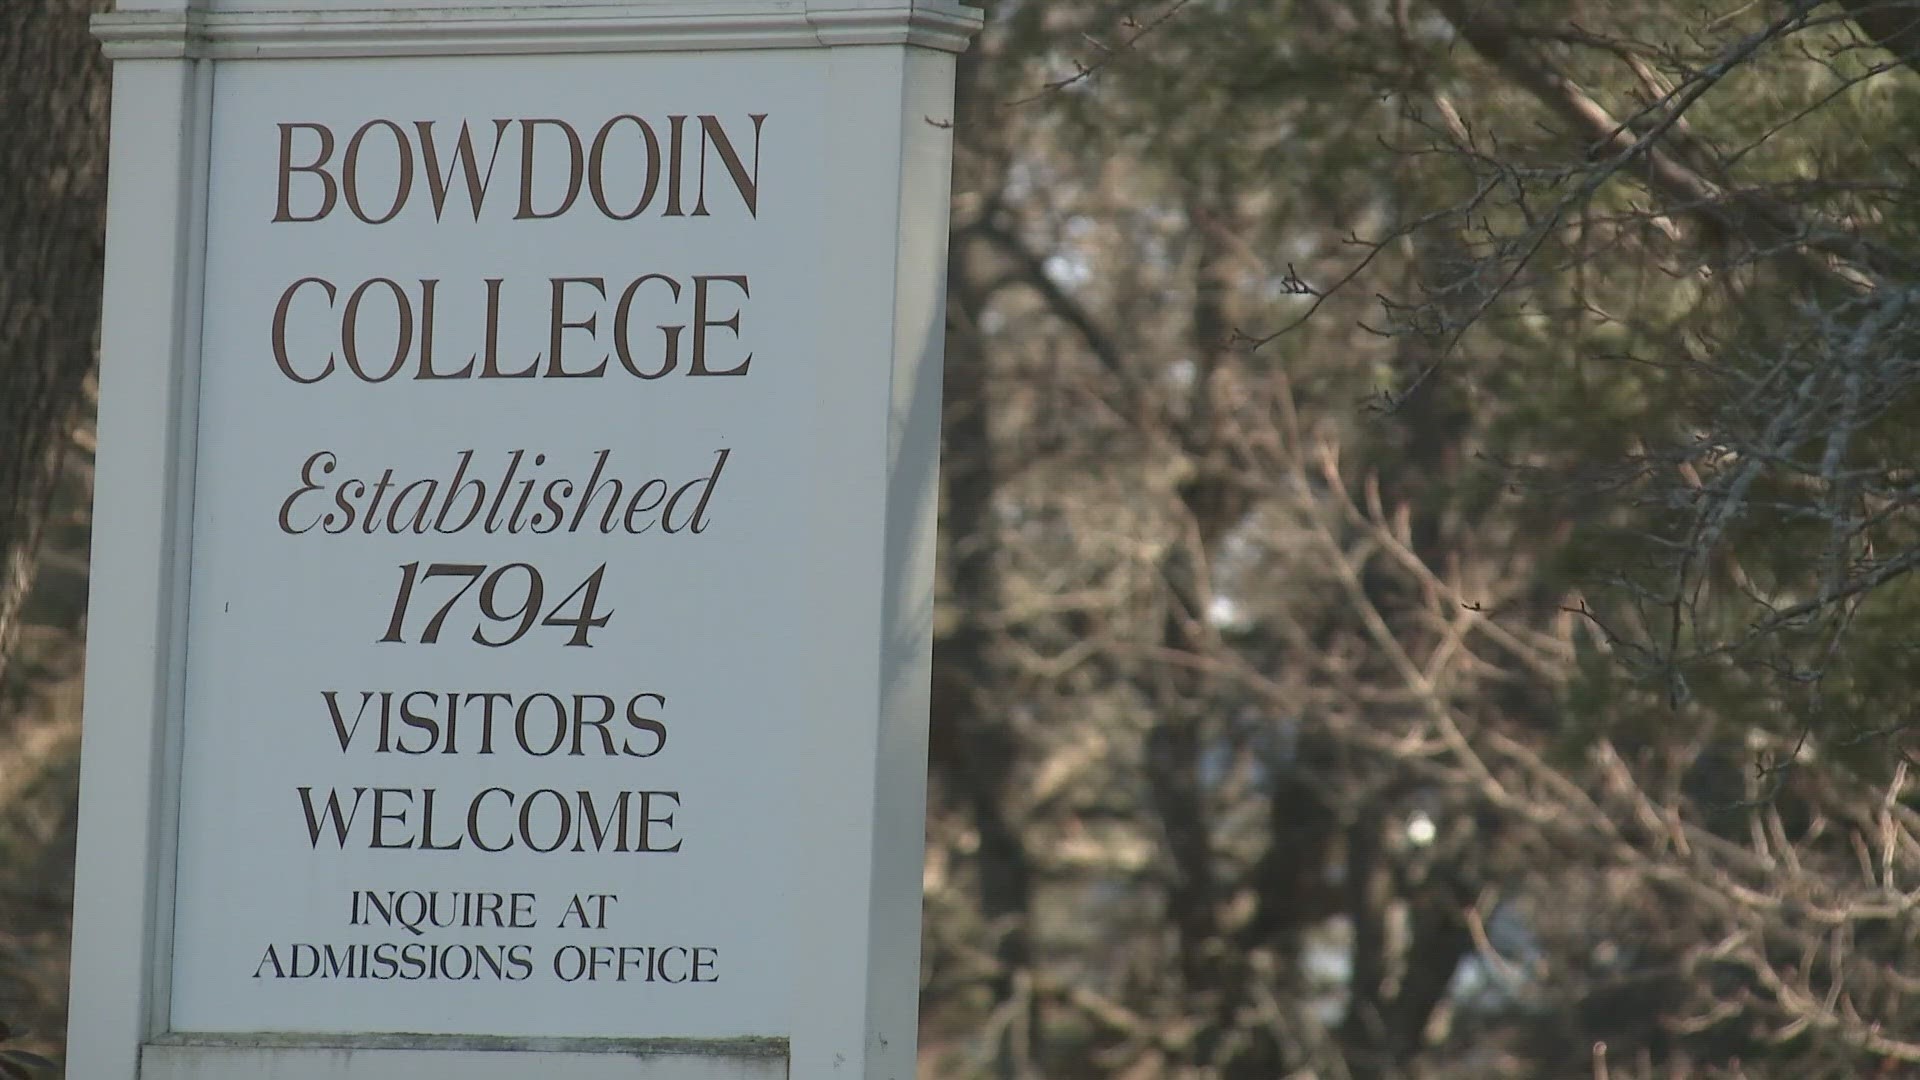 Police are investigating after a Bowdoin College student was found dead in a parking lot near the Frank J. Wood Bridge in Topsham on Sunday.